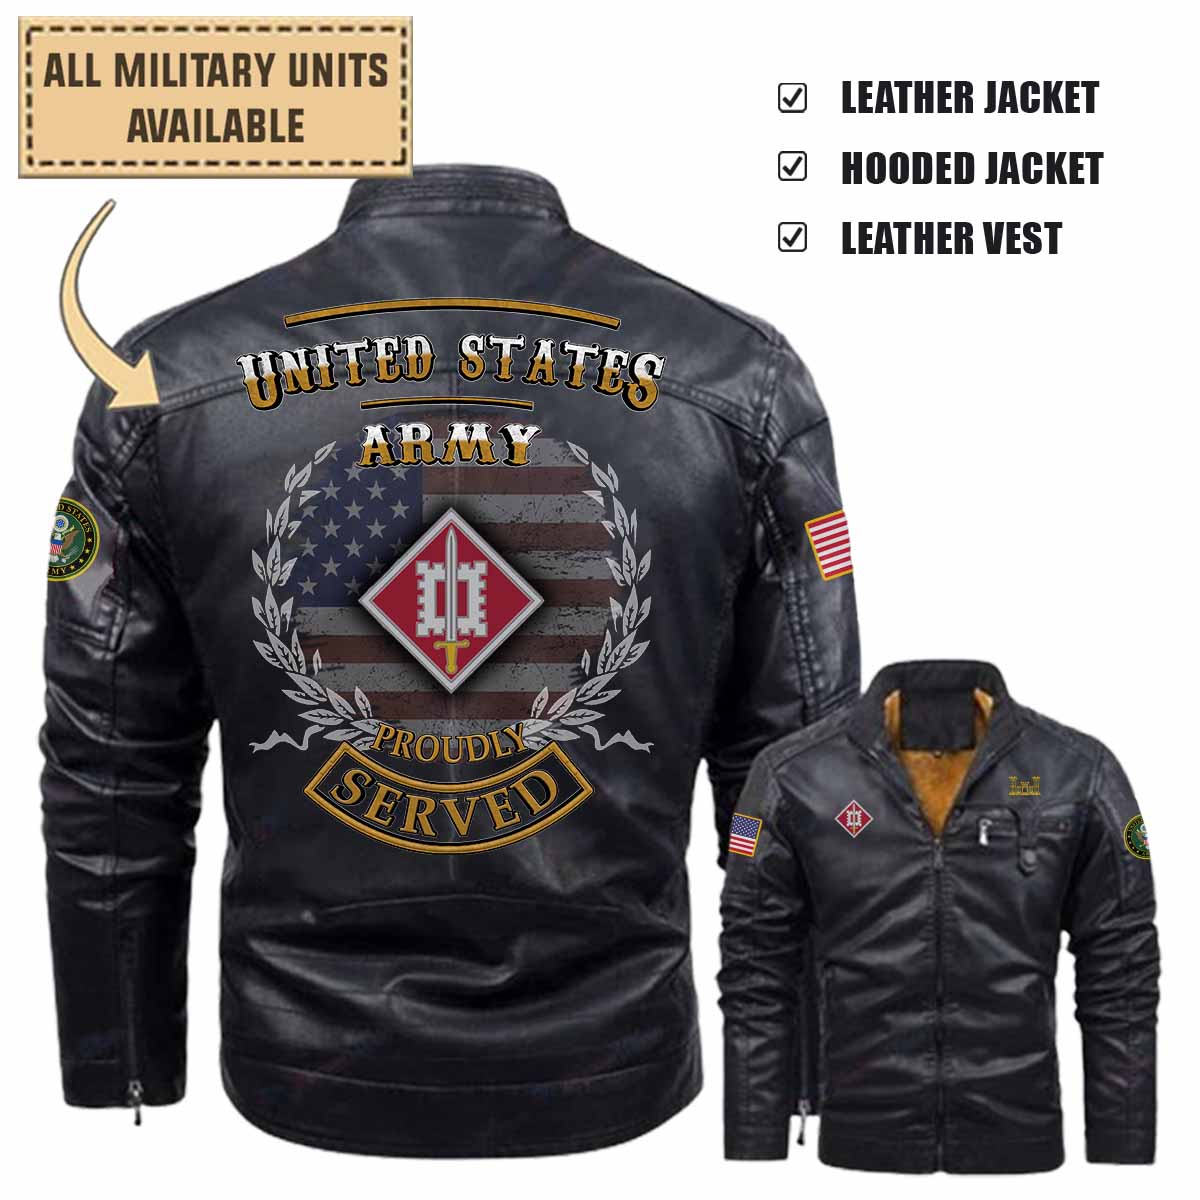 569th EN CO 569th Engineer Company, 18th EN BDE_Military Leather Jacket and Vest